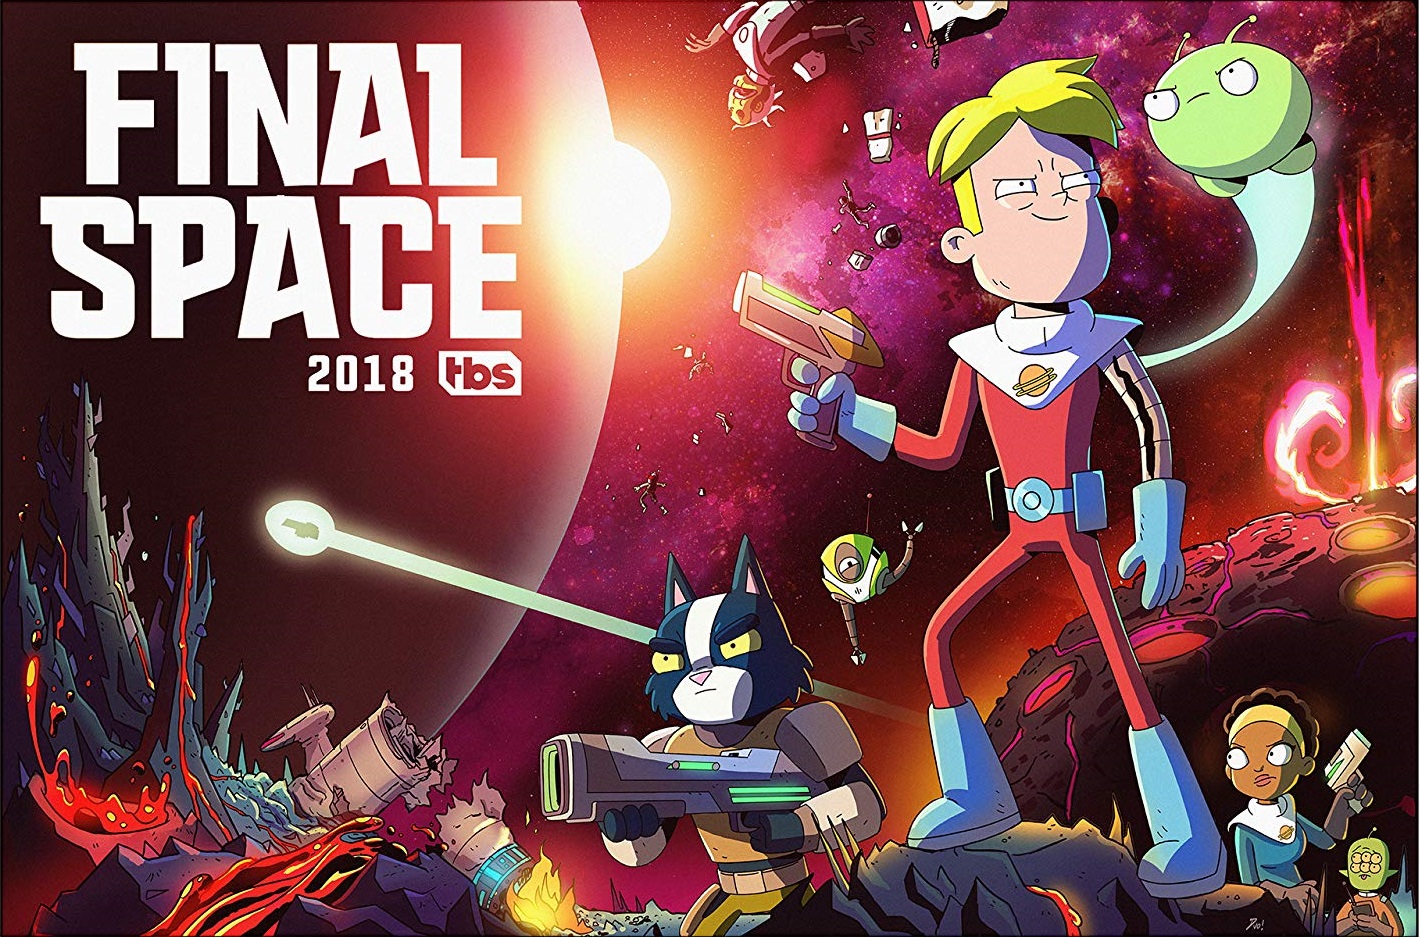 Final Space. 